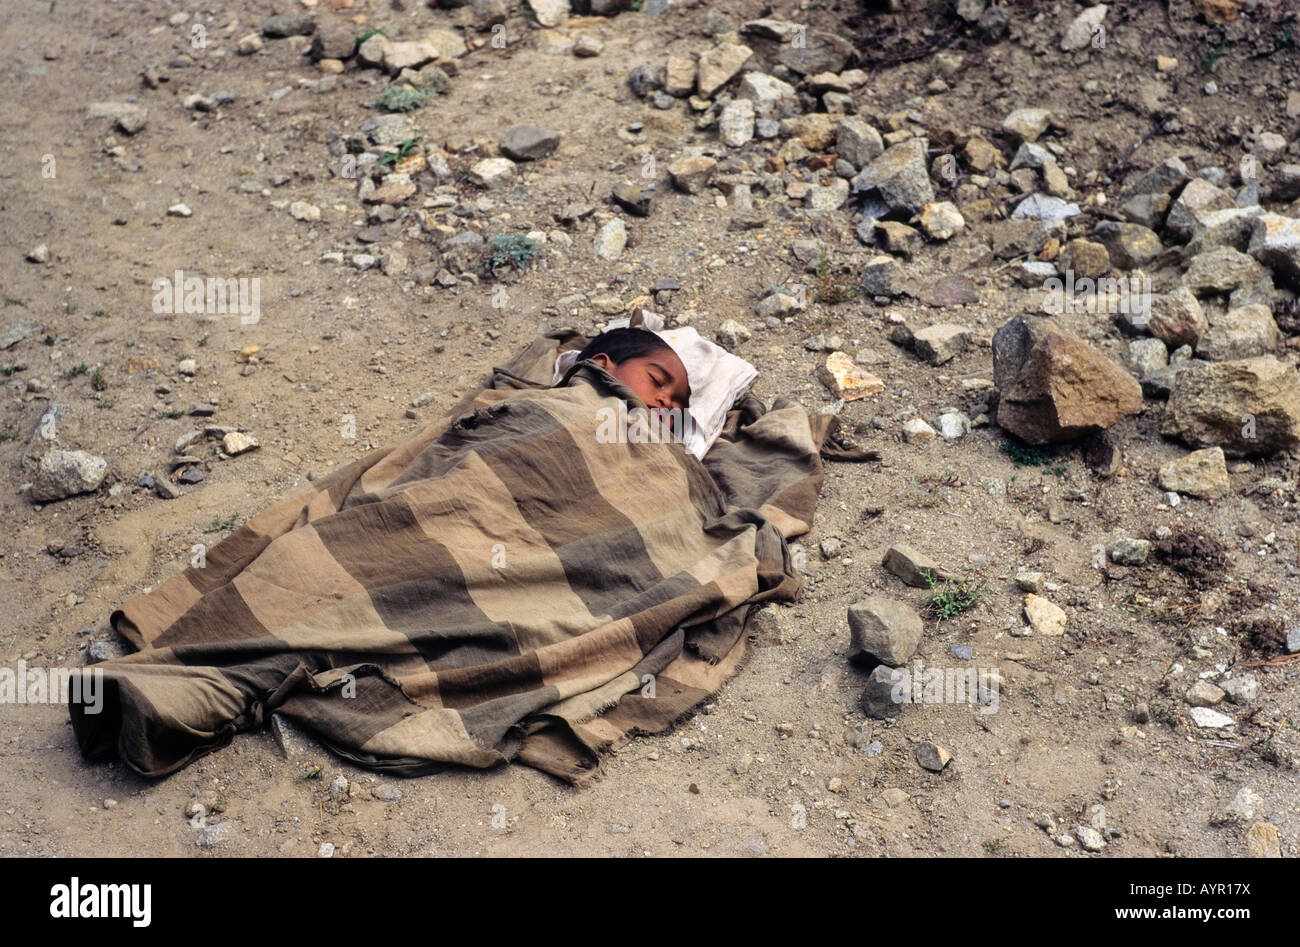 Small child wrapped in wool blanket laying on a dusty gravel road sleeping, Kashmir, Himalayas, India Stock Photo